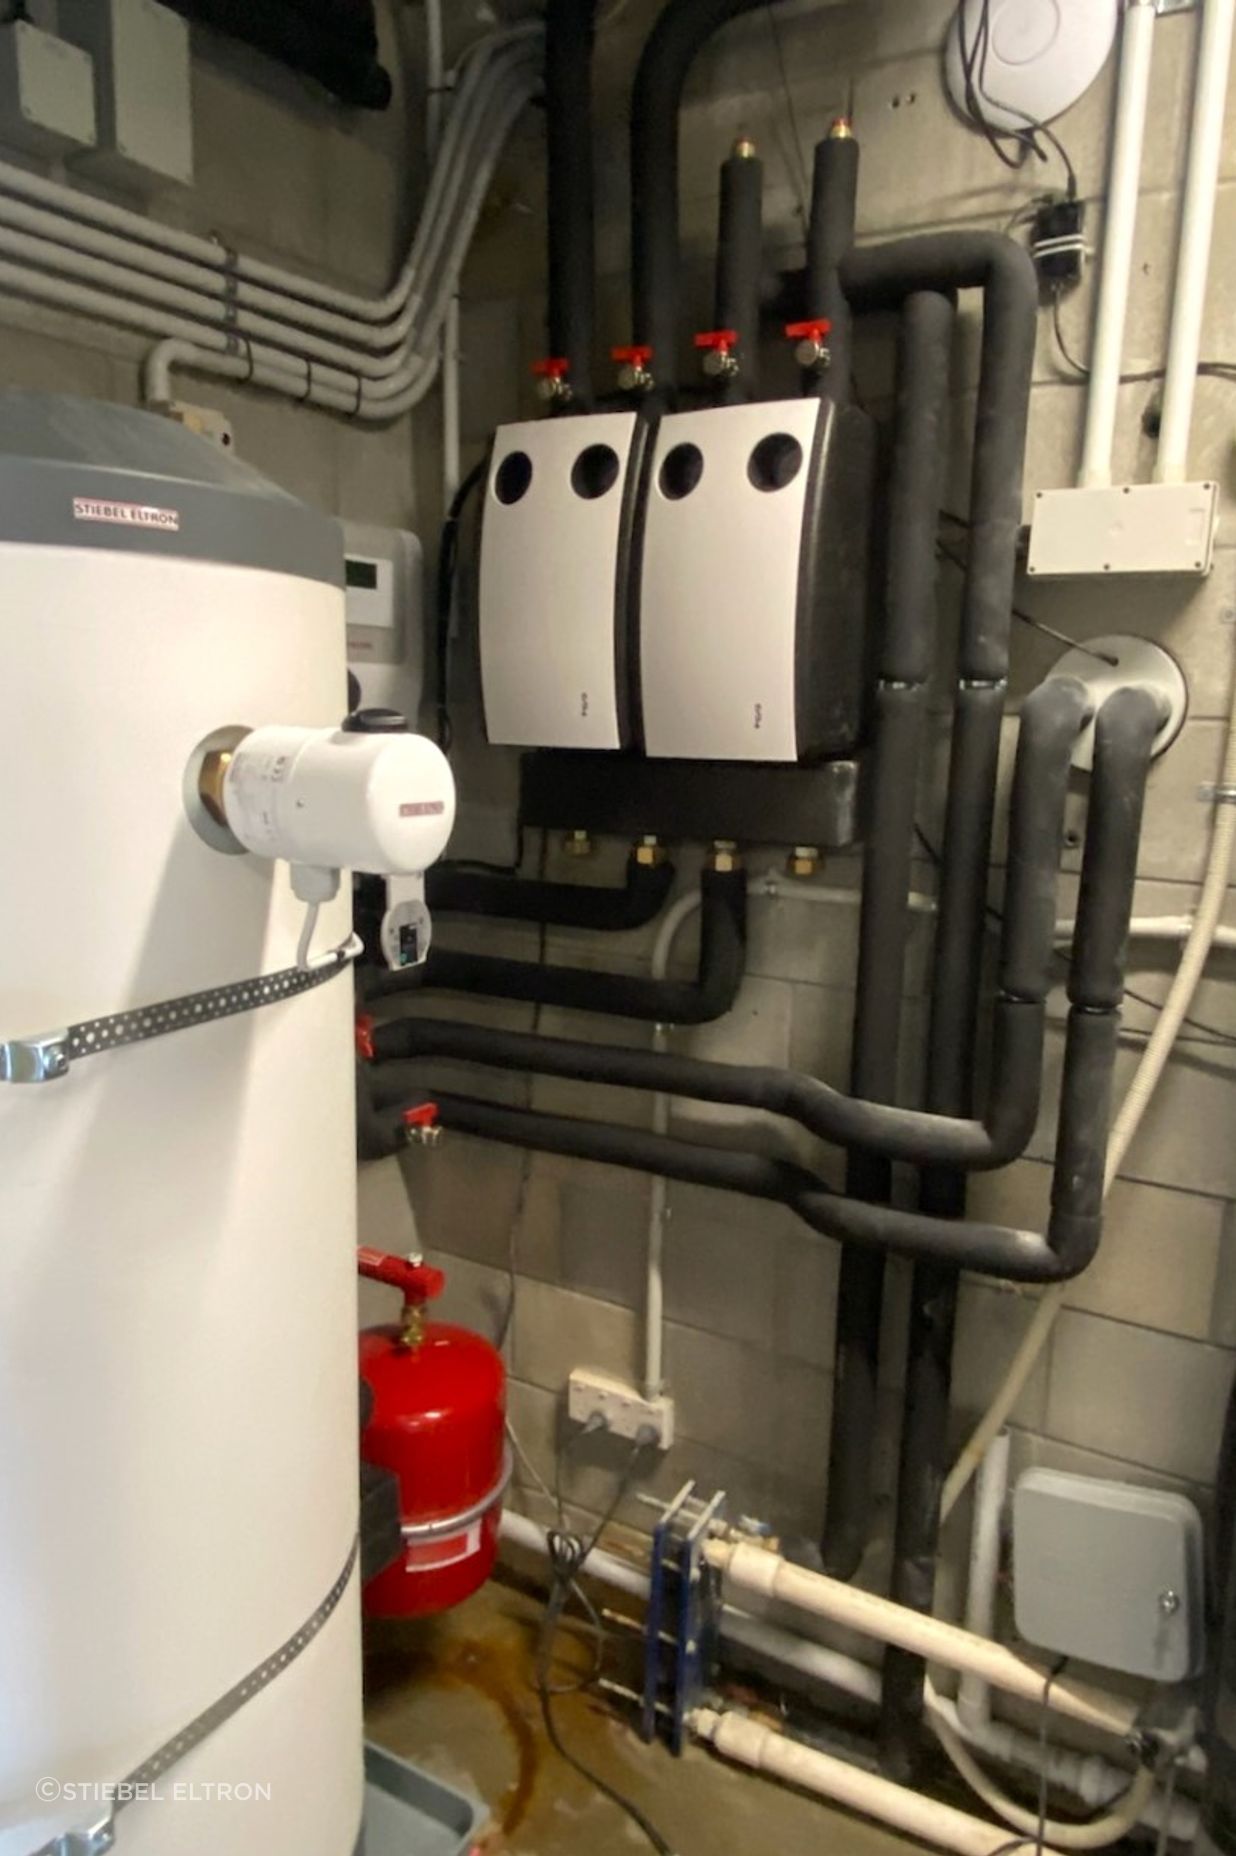 The new plant room set-up replacing the gas boiler with a heating circuit pump station and potable water cylinder.